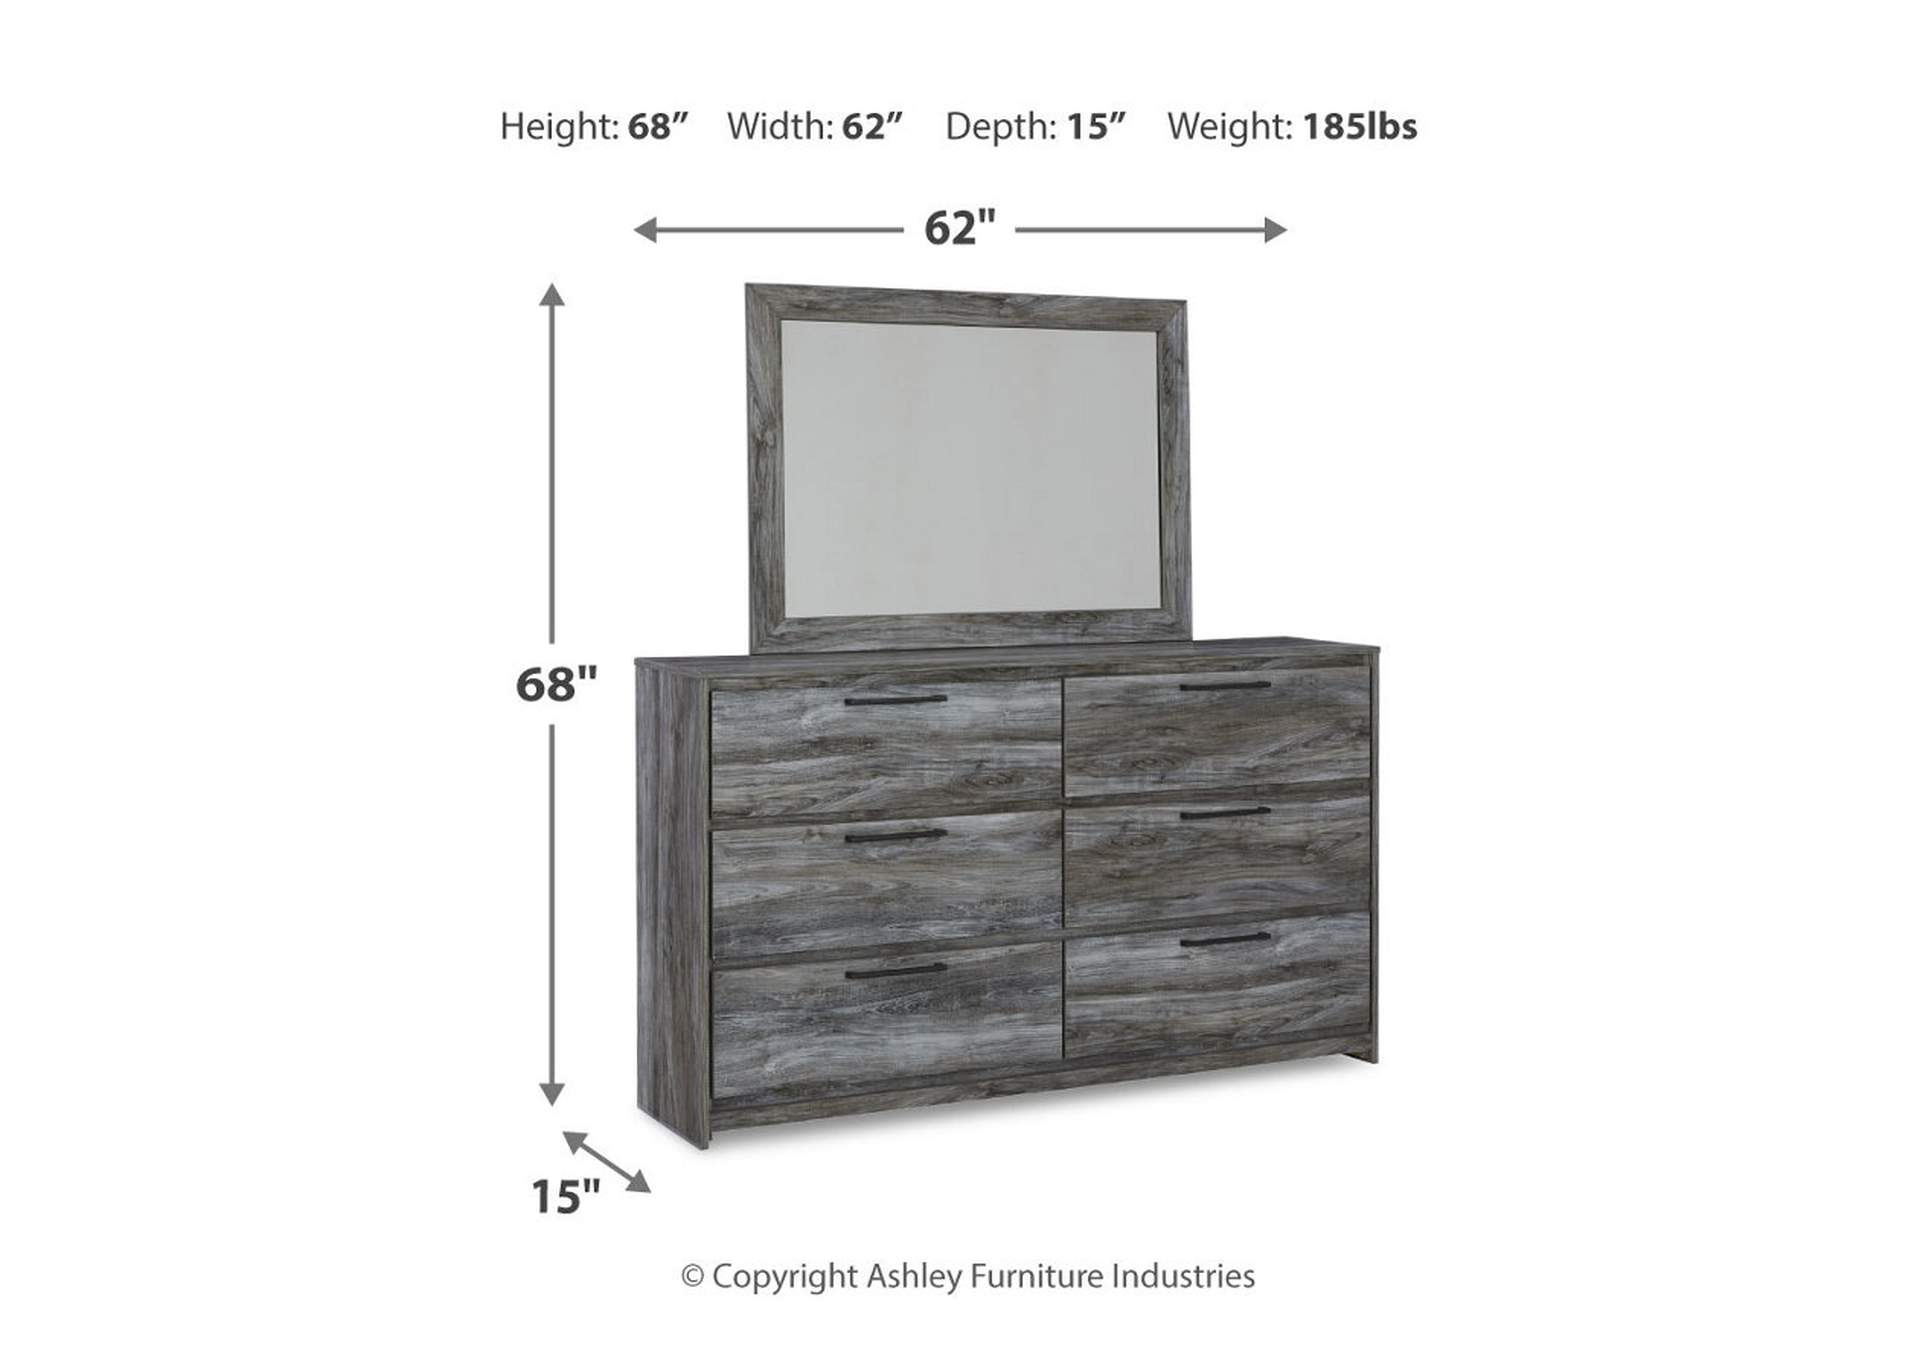 Baystorm Queen Panel Storage Bed, Dresser, Mirror, Chest and 2 Nightstands,Signature Design By Ashley